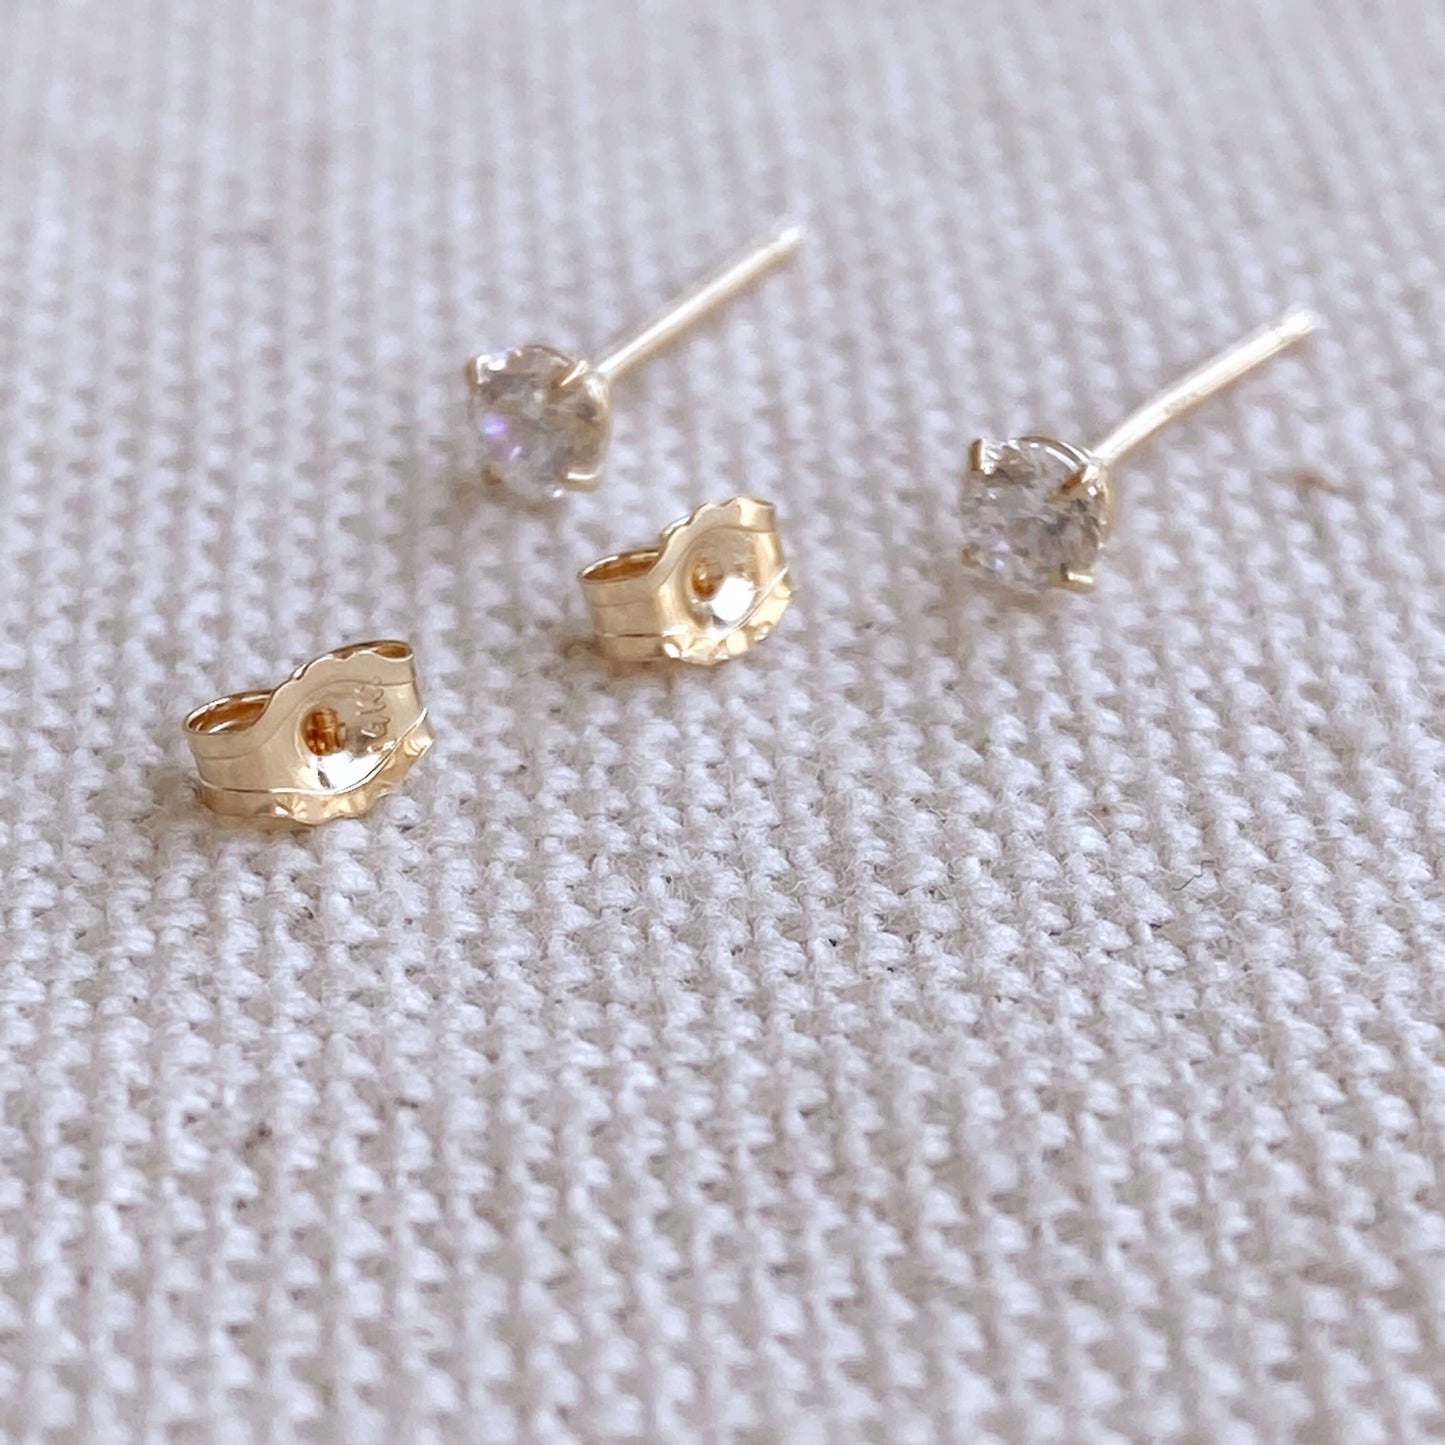 GoldFi 14k Solid Gold Round 3mm Cubic Zirconia Stud Earrings